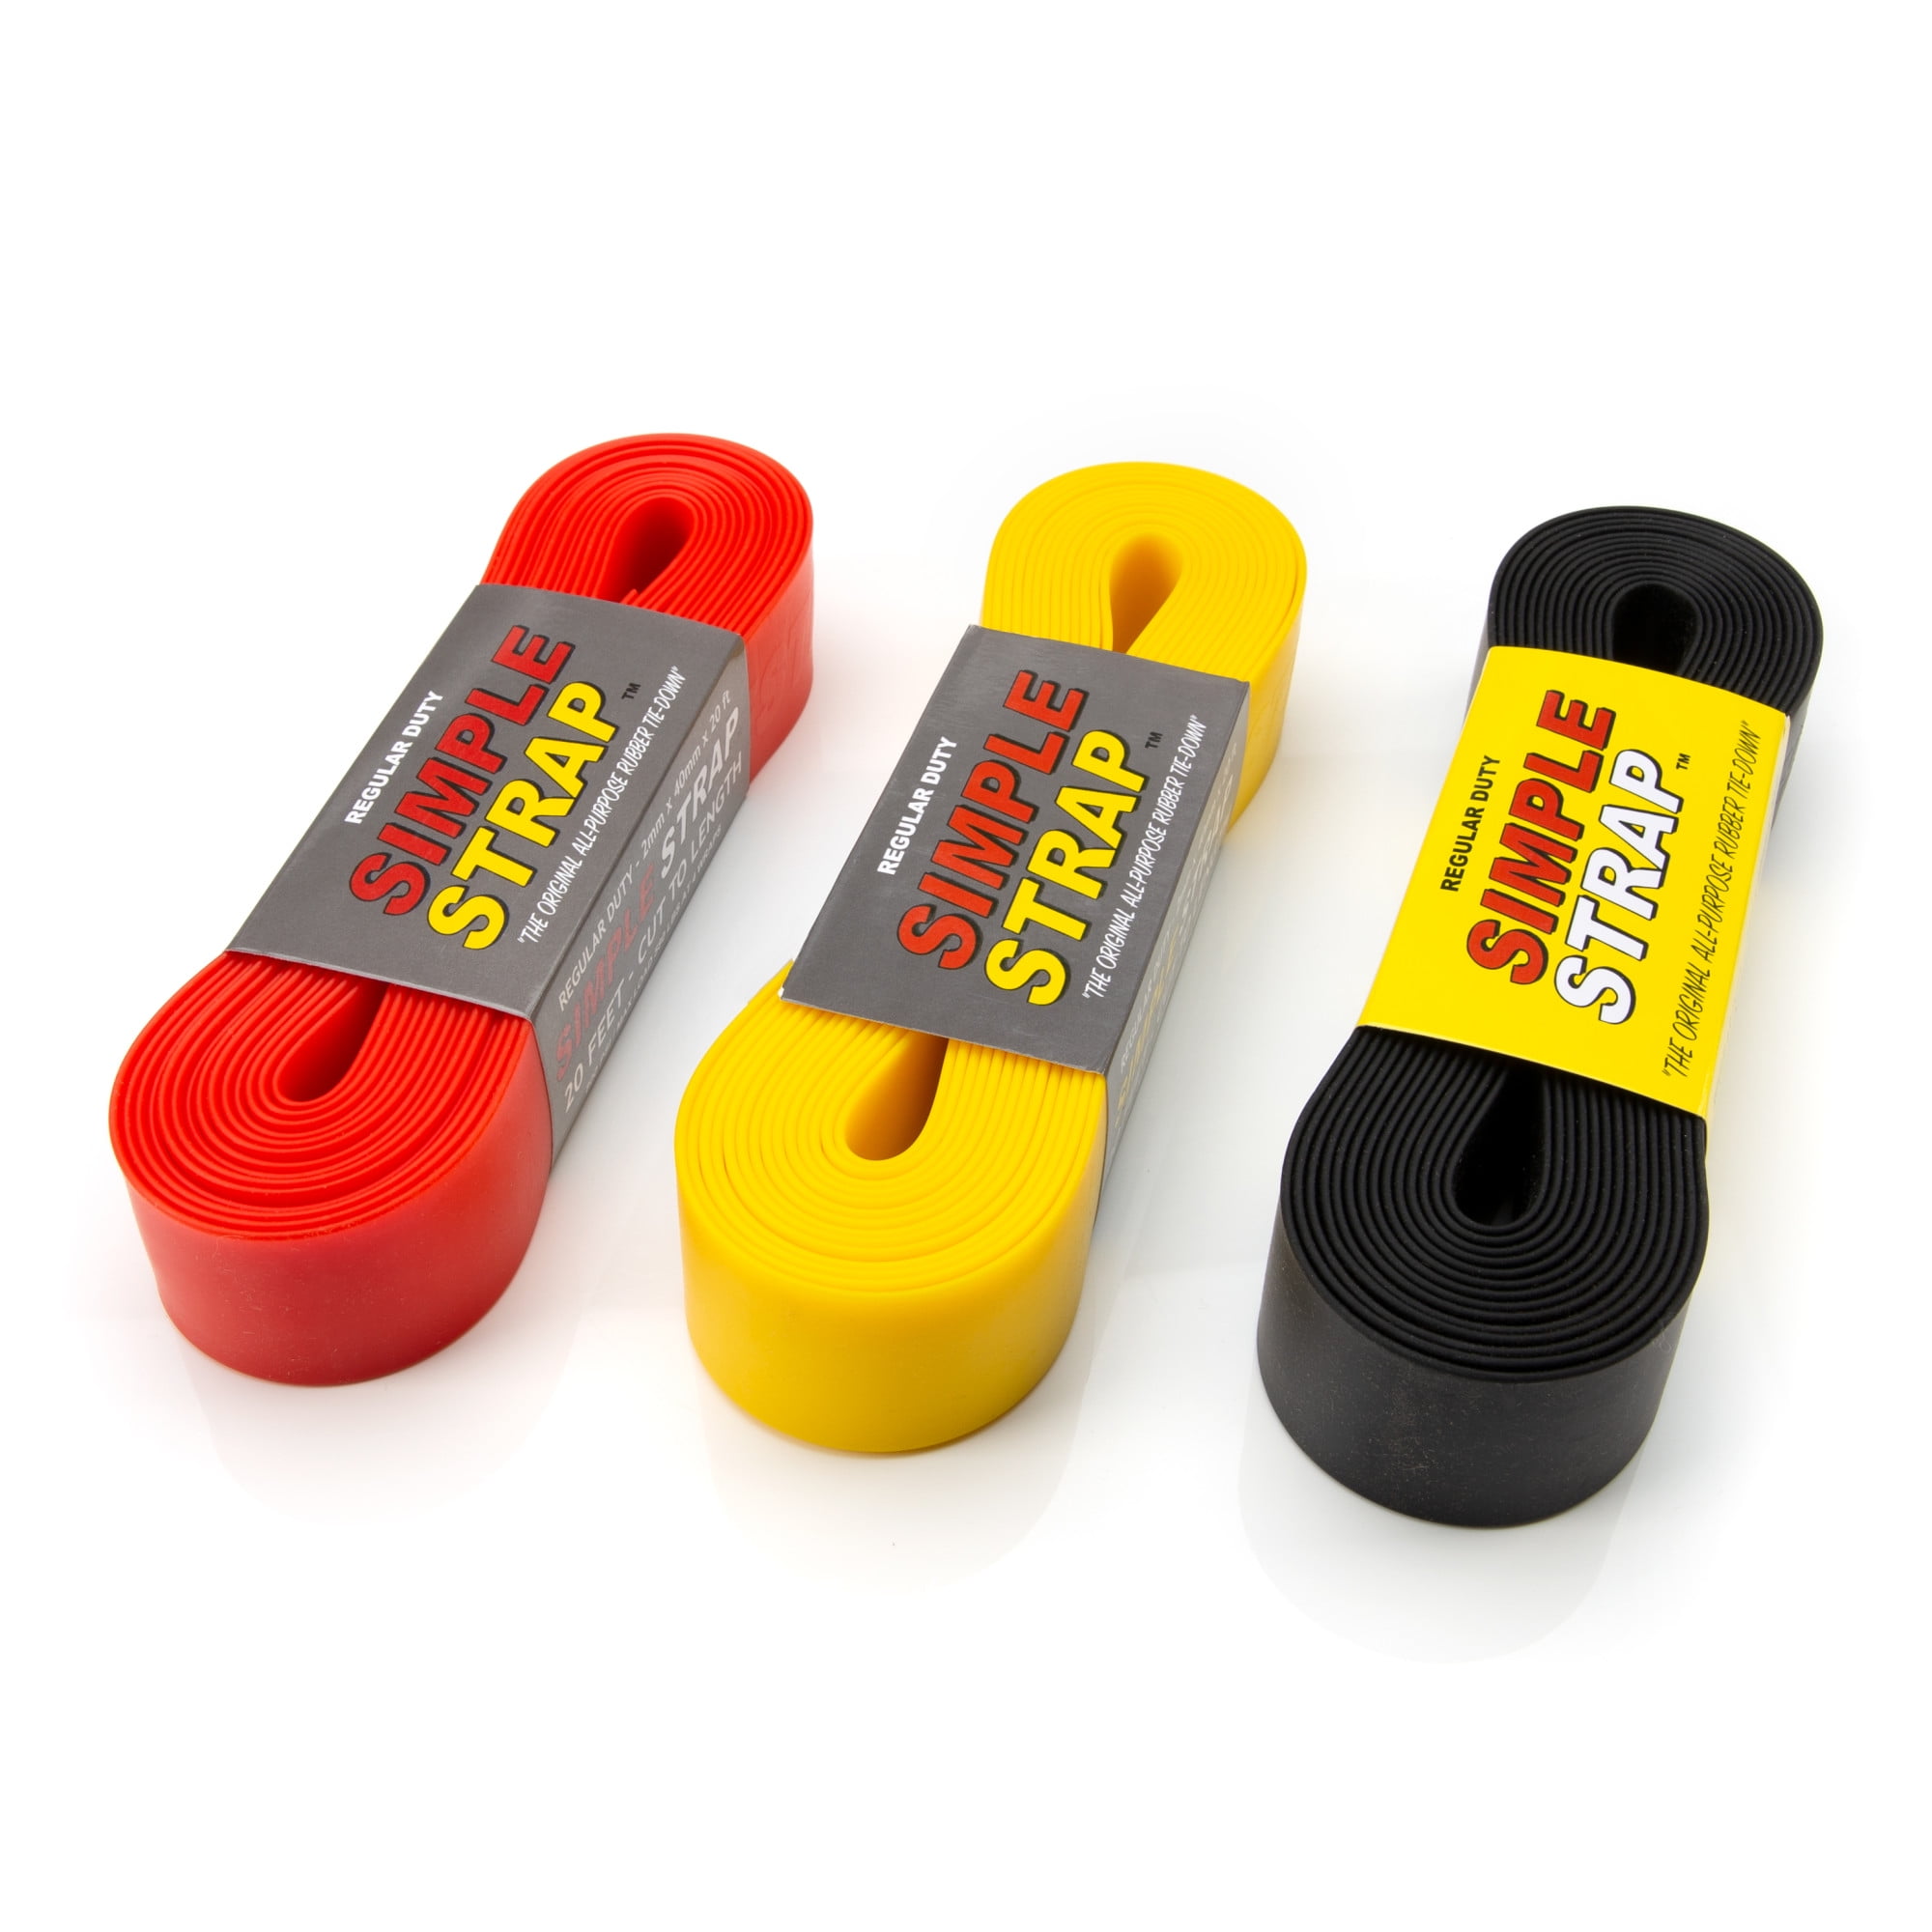 Details about   Simple Strap Self-Gripping 2mm Thick Rubber Tie Down Straps MultiClr 3Pk 20007 